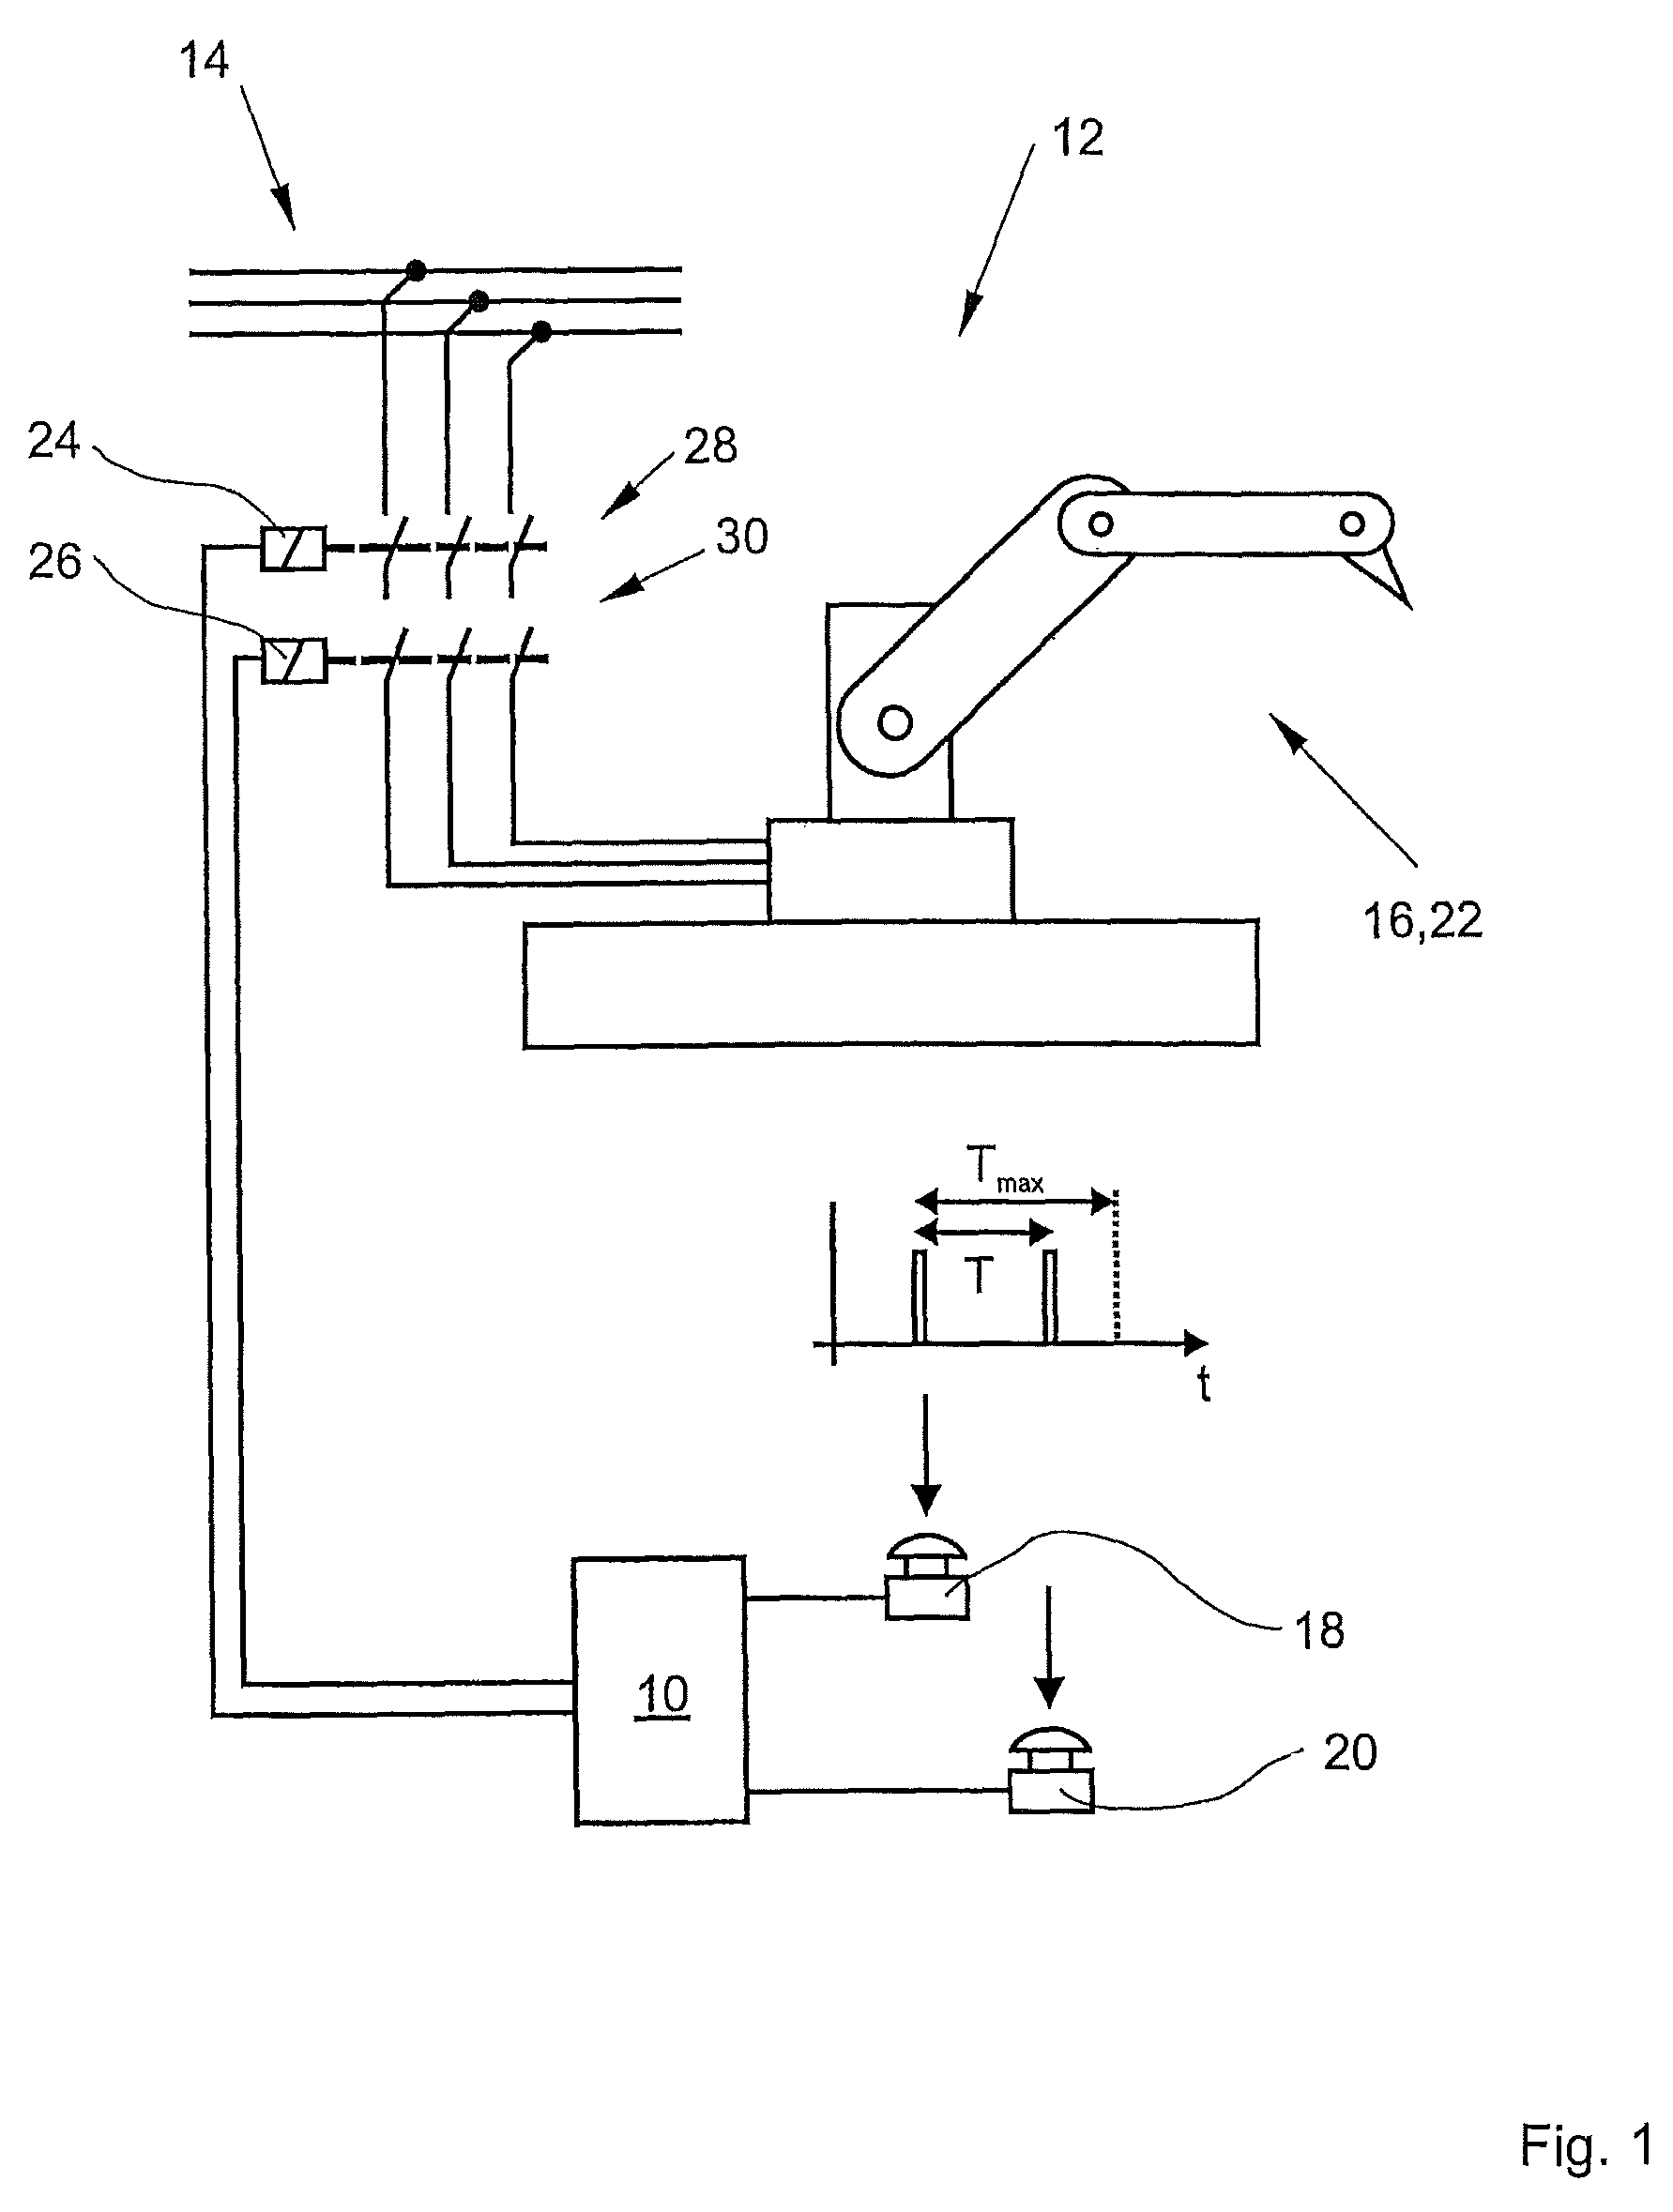 Safety switching apparatus and method for safely switching an electrical load on and off